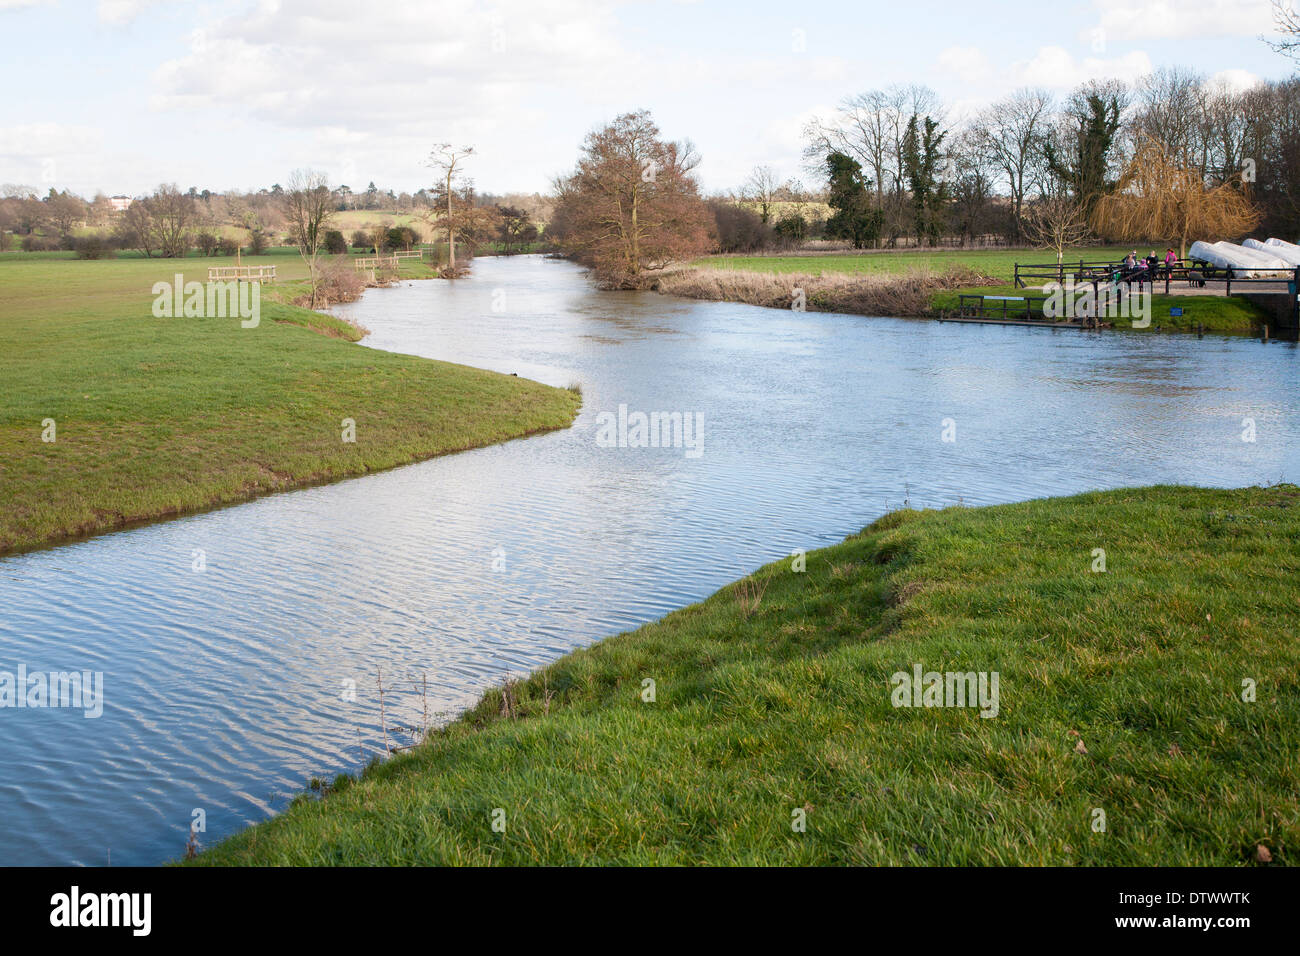 A tributary joining the River Stour at a confluence of waters at Dedham, Essex, England Stock Photo